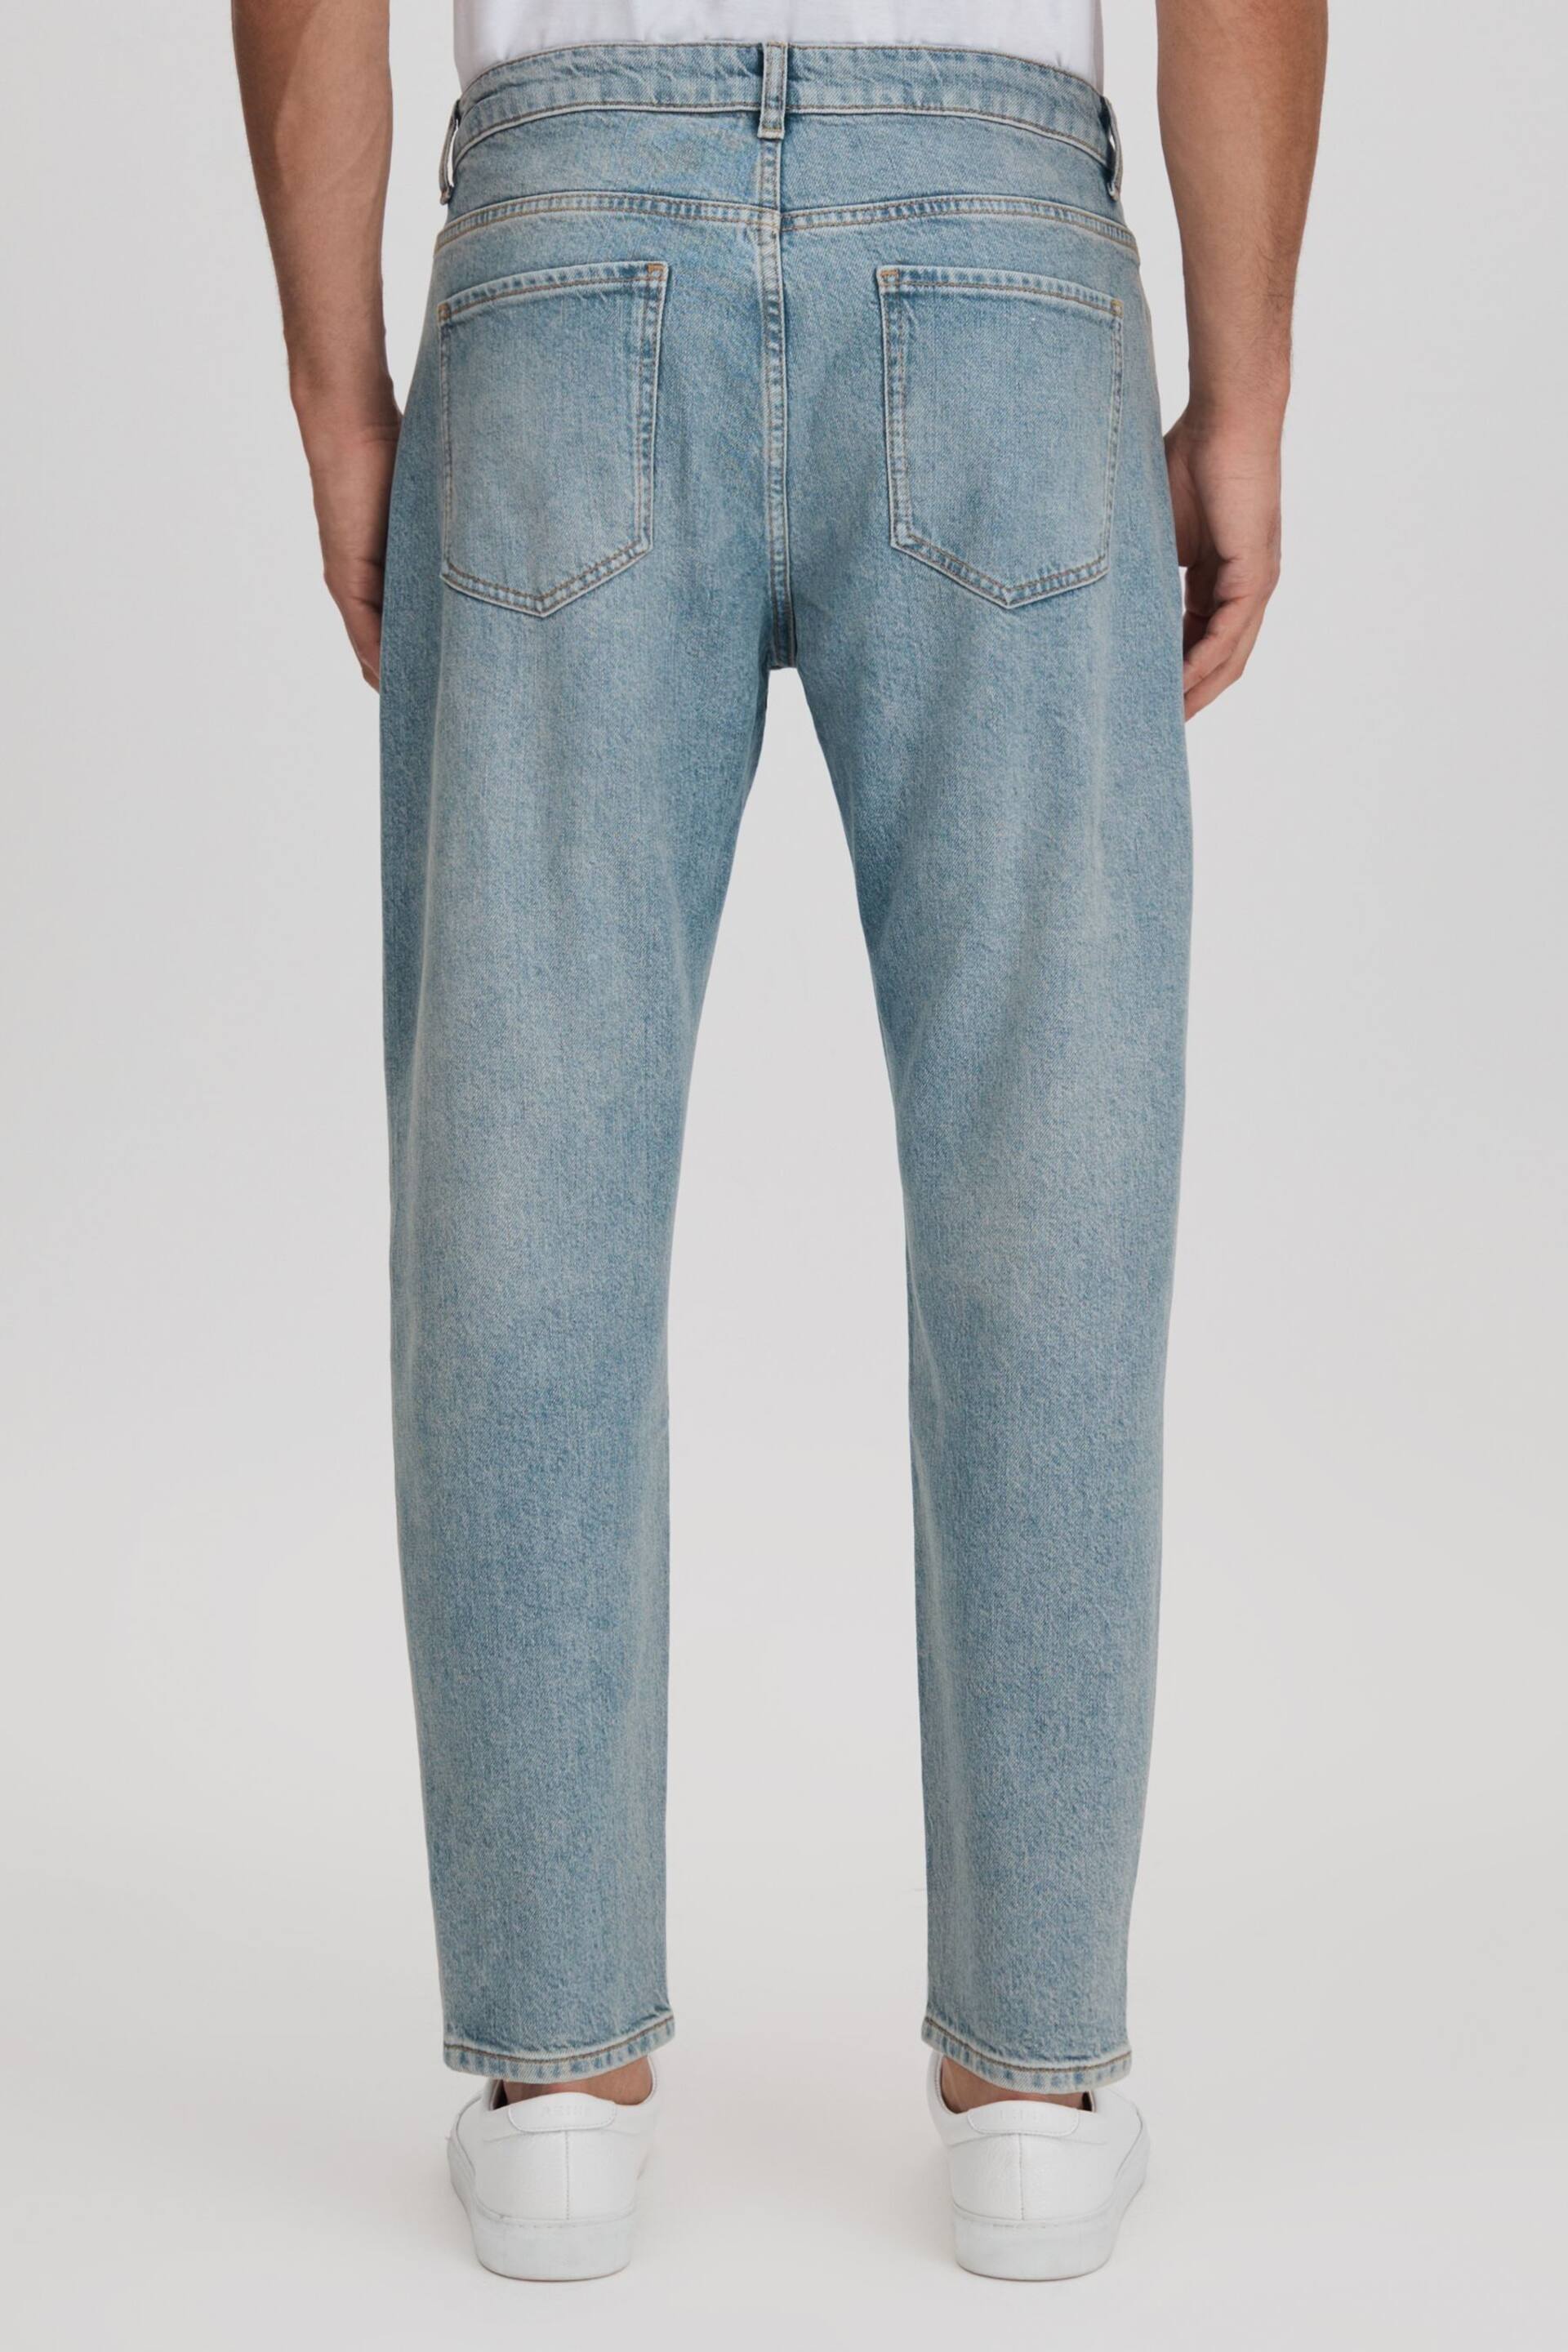 Reiss Light Blue Ordu R Relaxed Tapered Jeans - Image 5 of 6